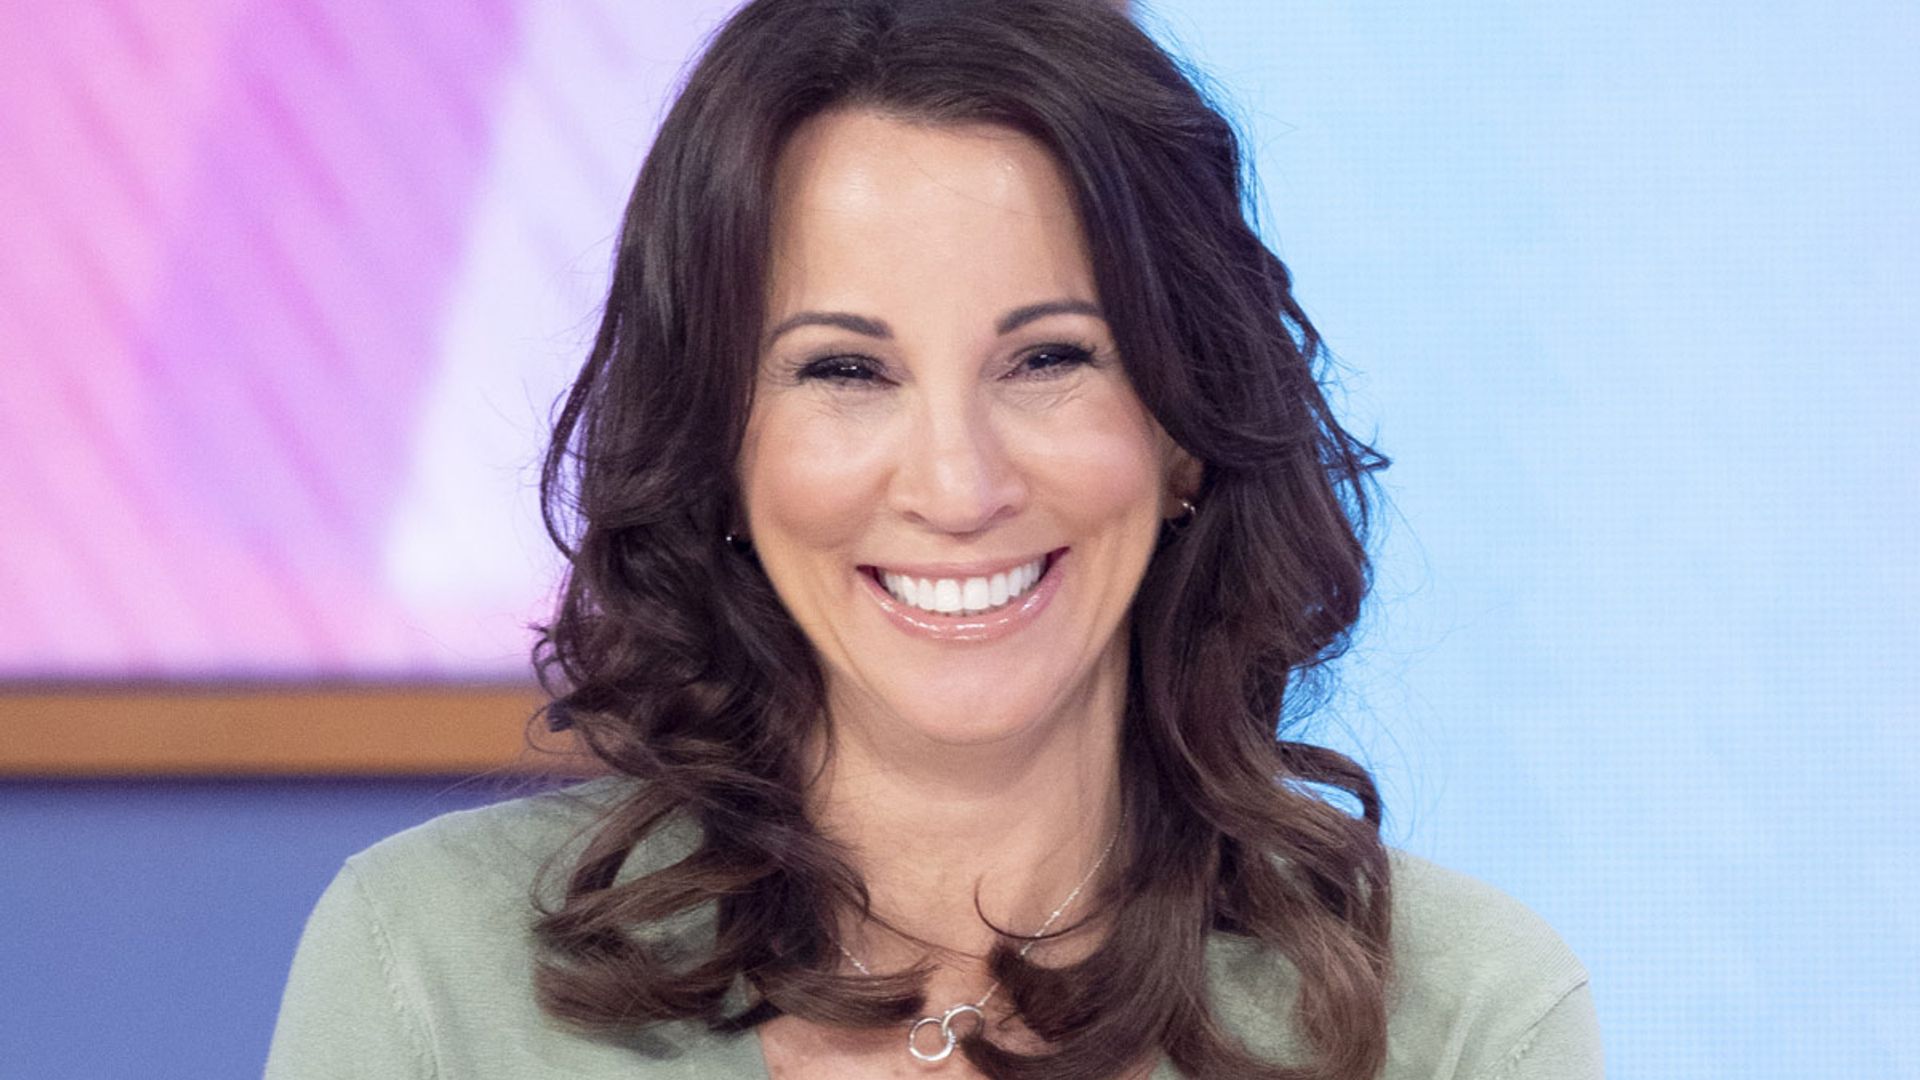 Loose Women star Andrea McLean's green leather skirt goes ...